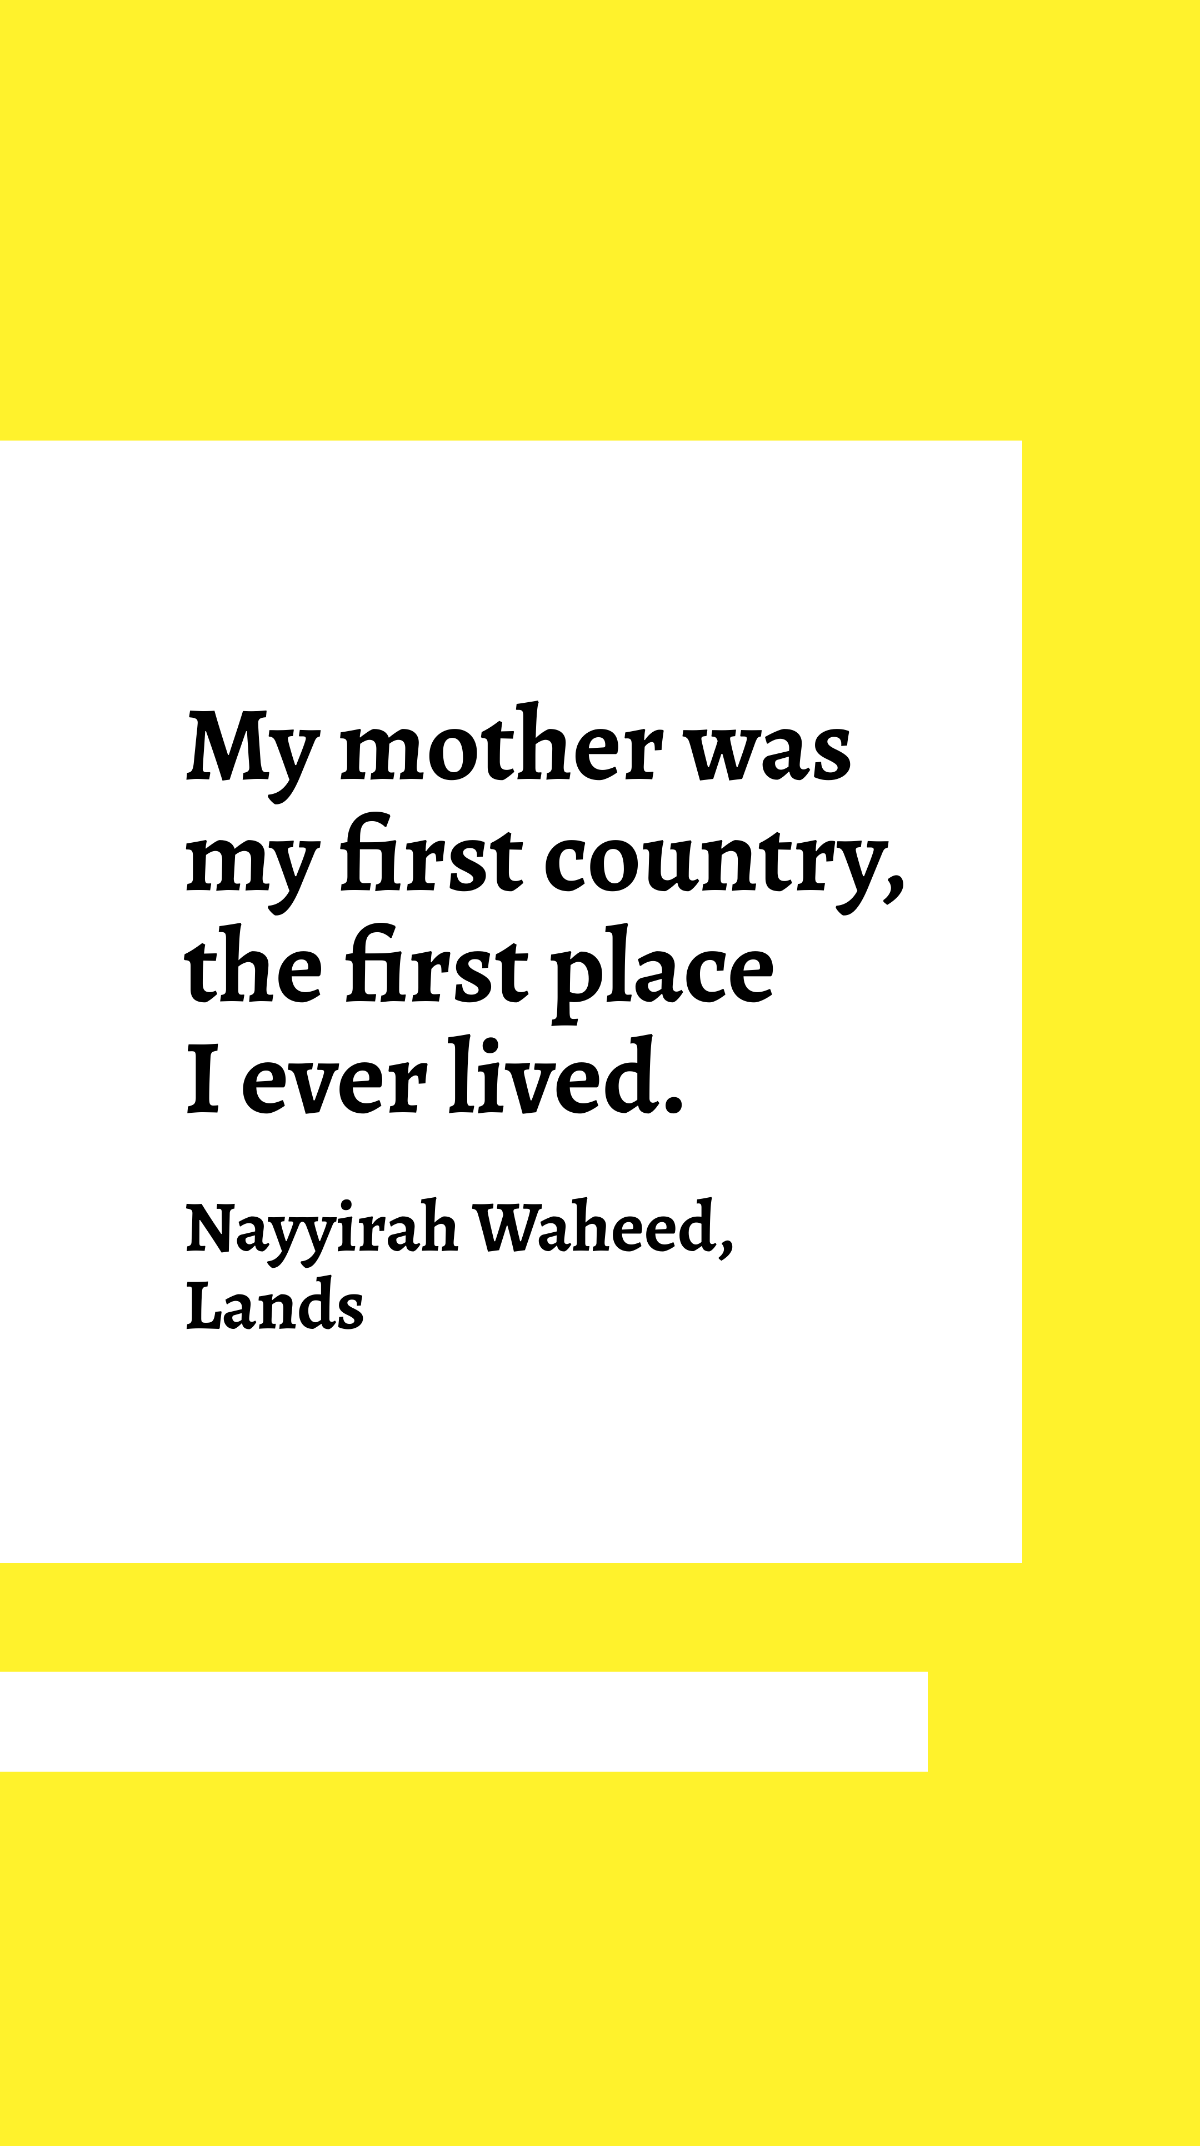 Free Nayyirah Waheed, Lands - My mother was my first country, the first place I ever lived. Template